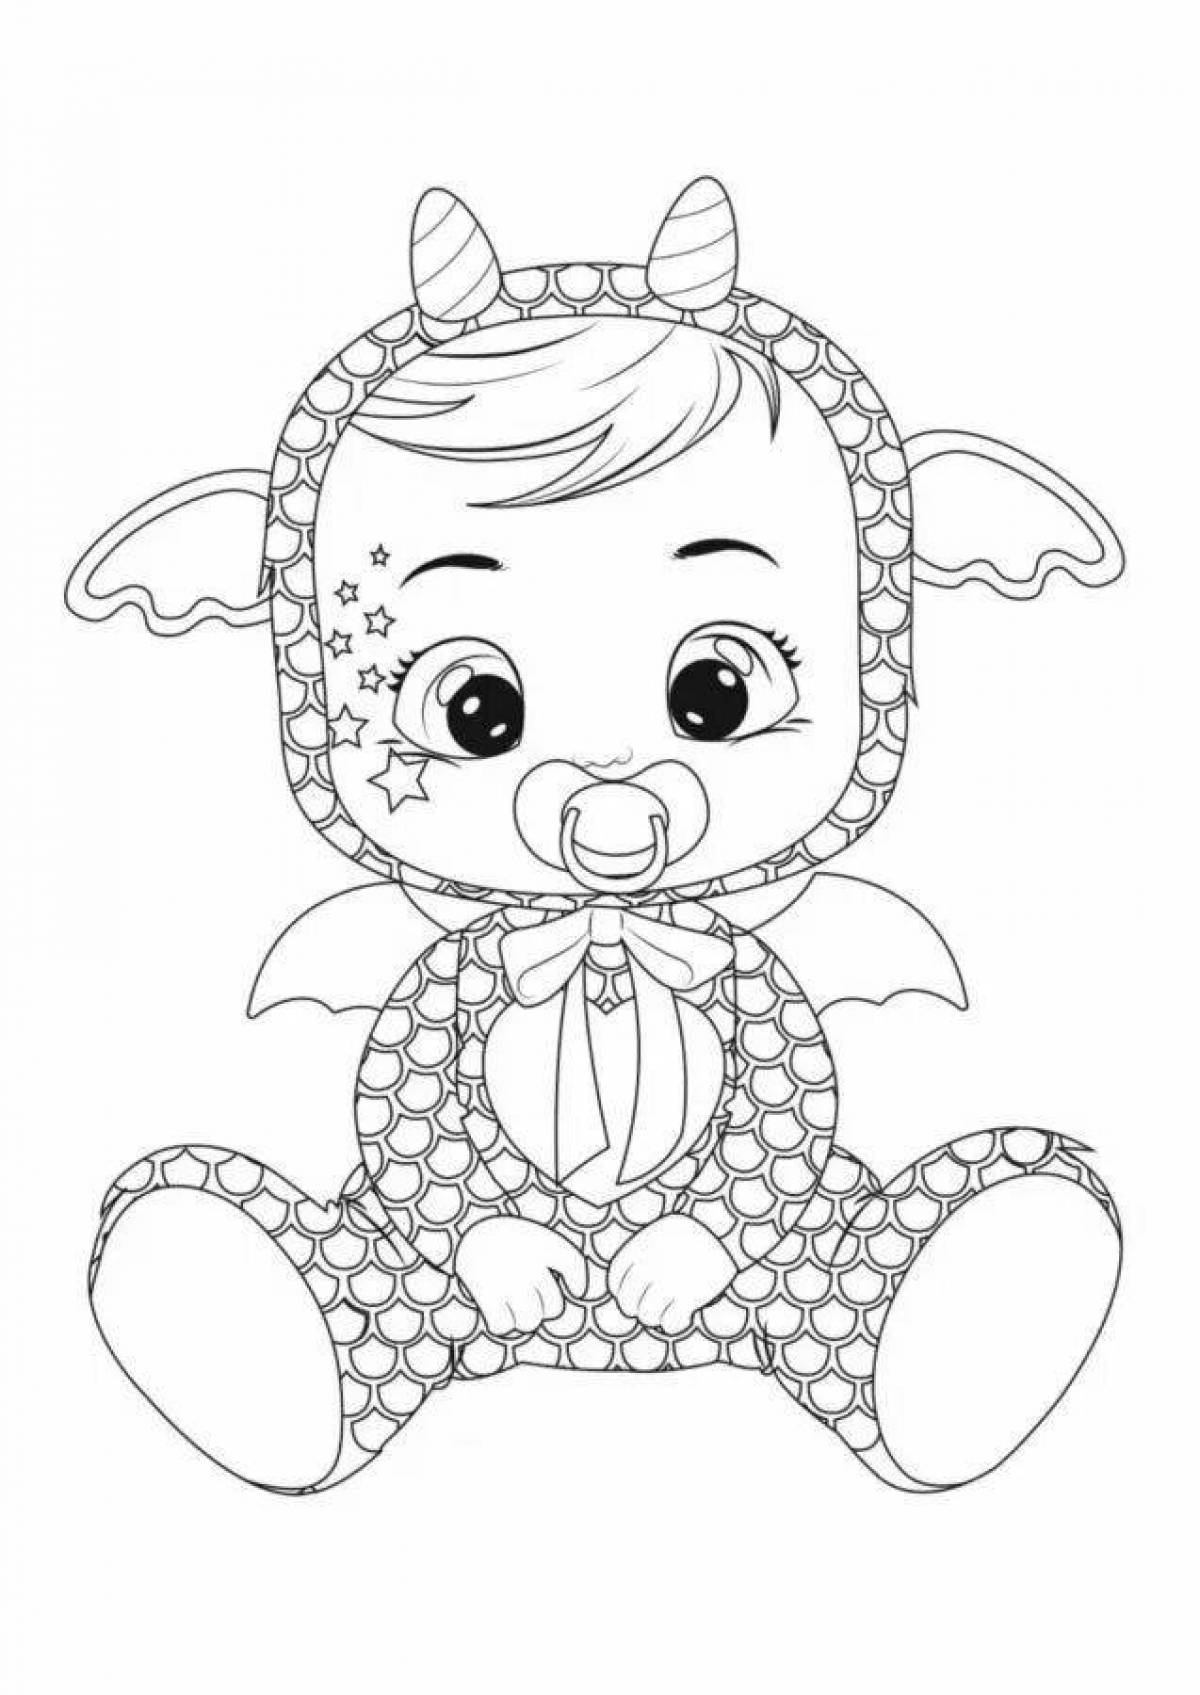 Charon adorable baby coloring page